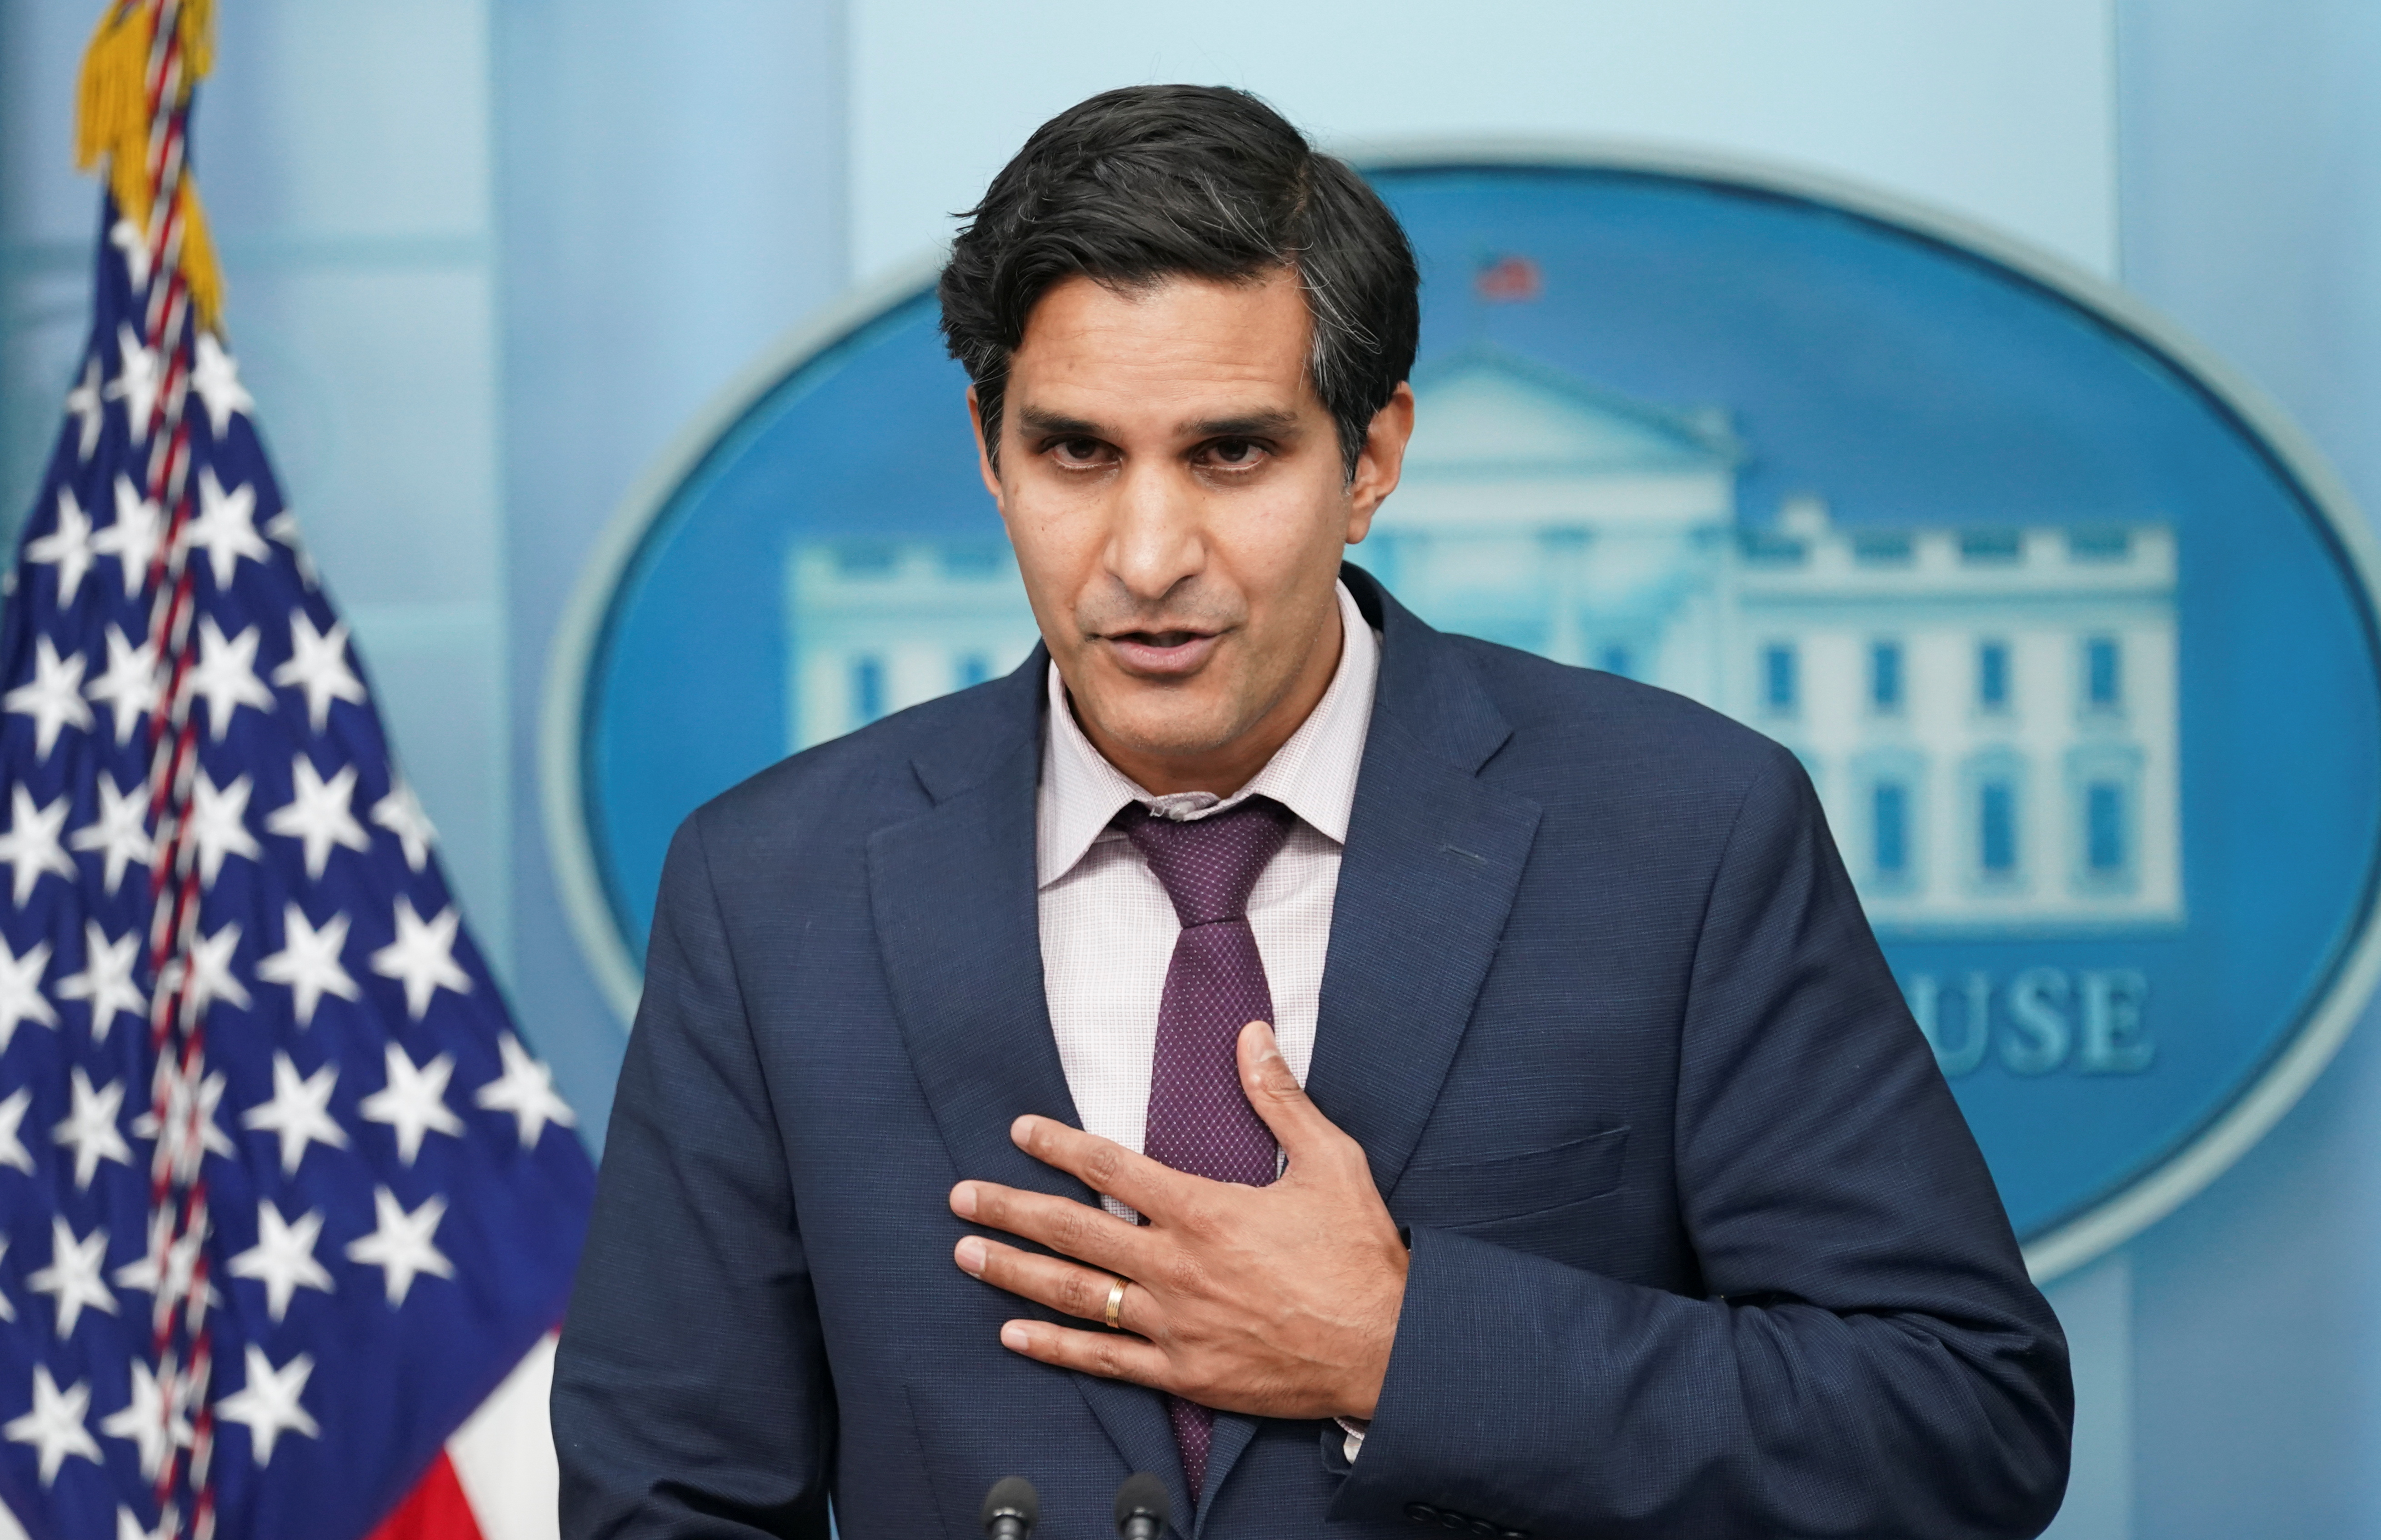 Daleep Singh speaks about sanctions against Russia during a press briefing at the White House in Washington